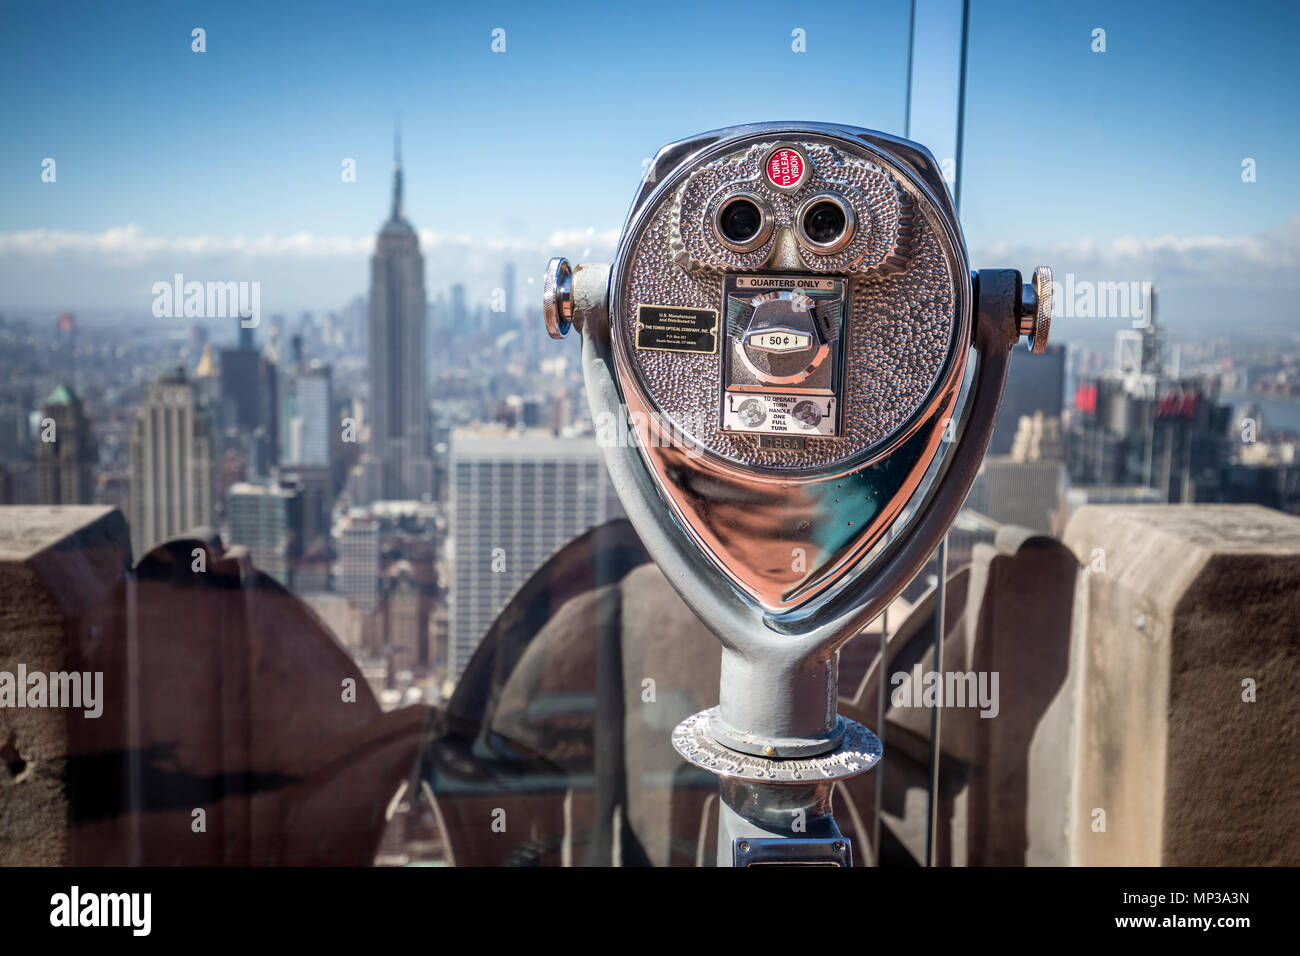 Iconic coin-operated telescope at Top of the Rock observation deck in New York City, USA. Stock Photo